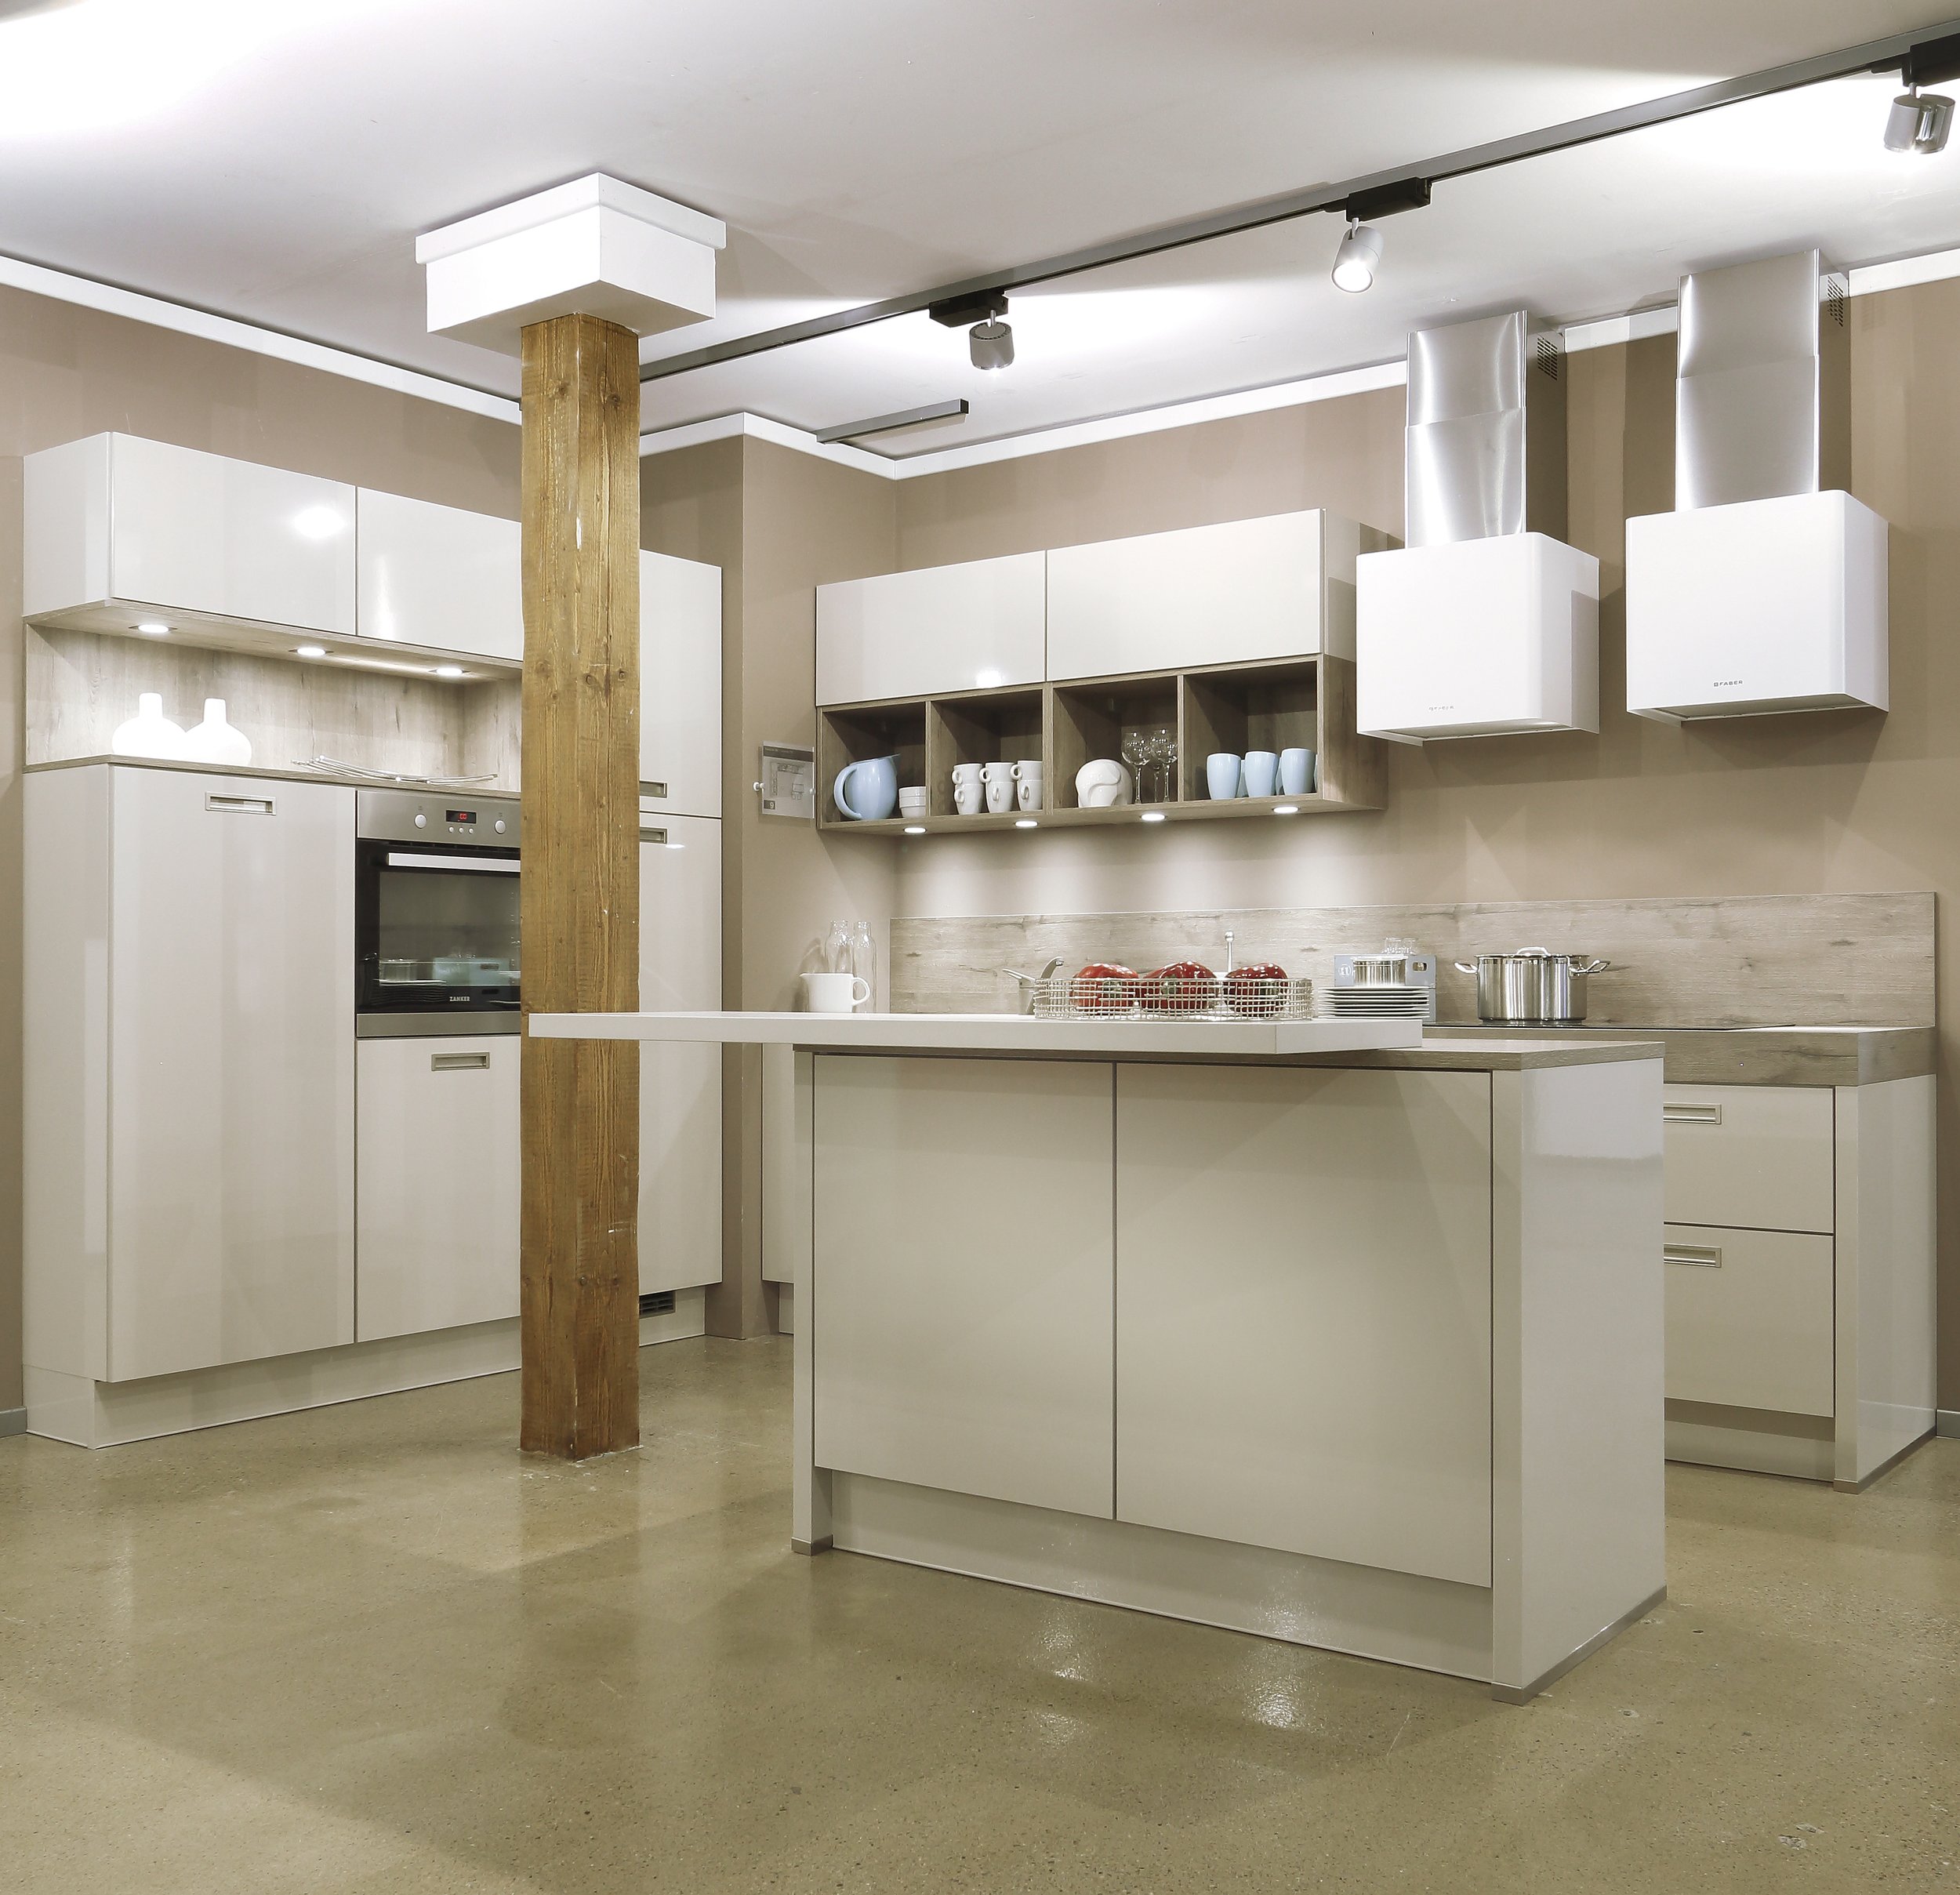   Kitchen Design In Seattle   There has been a shift in the way Seattle home owners and kitchen remodelers have approached remodeling their kitchens. You see, elegant, upscale and modern kitchens have become the focal point of today's kitchen remodel